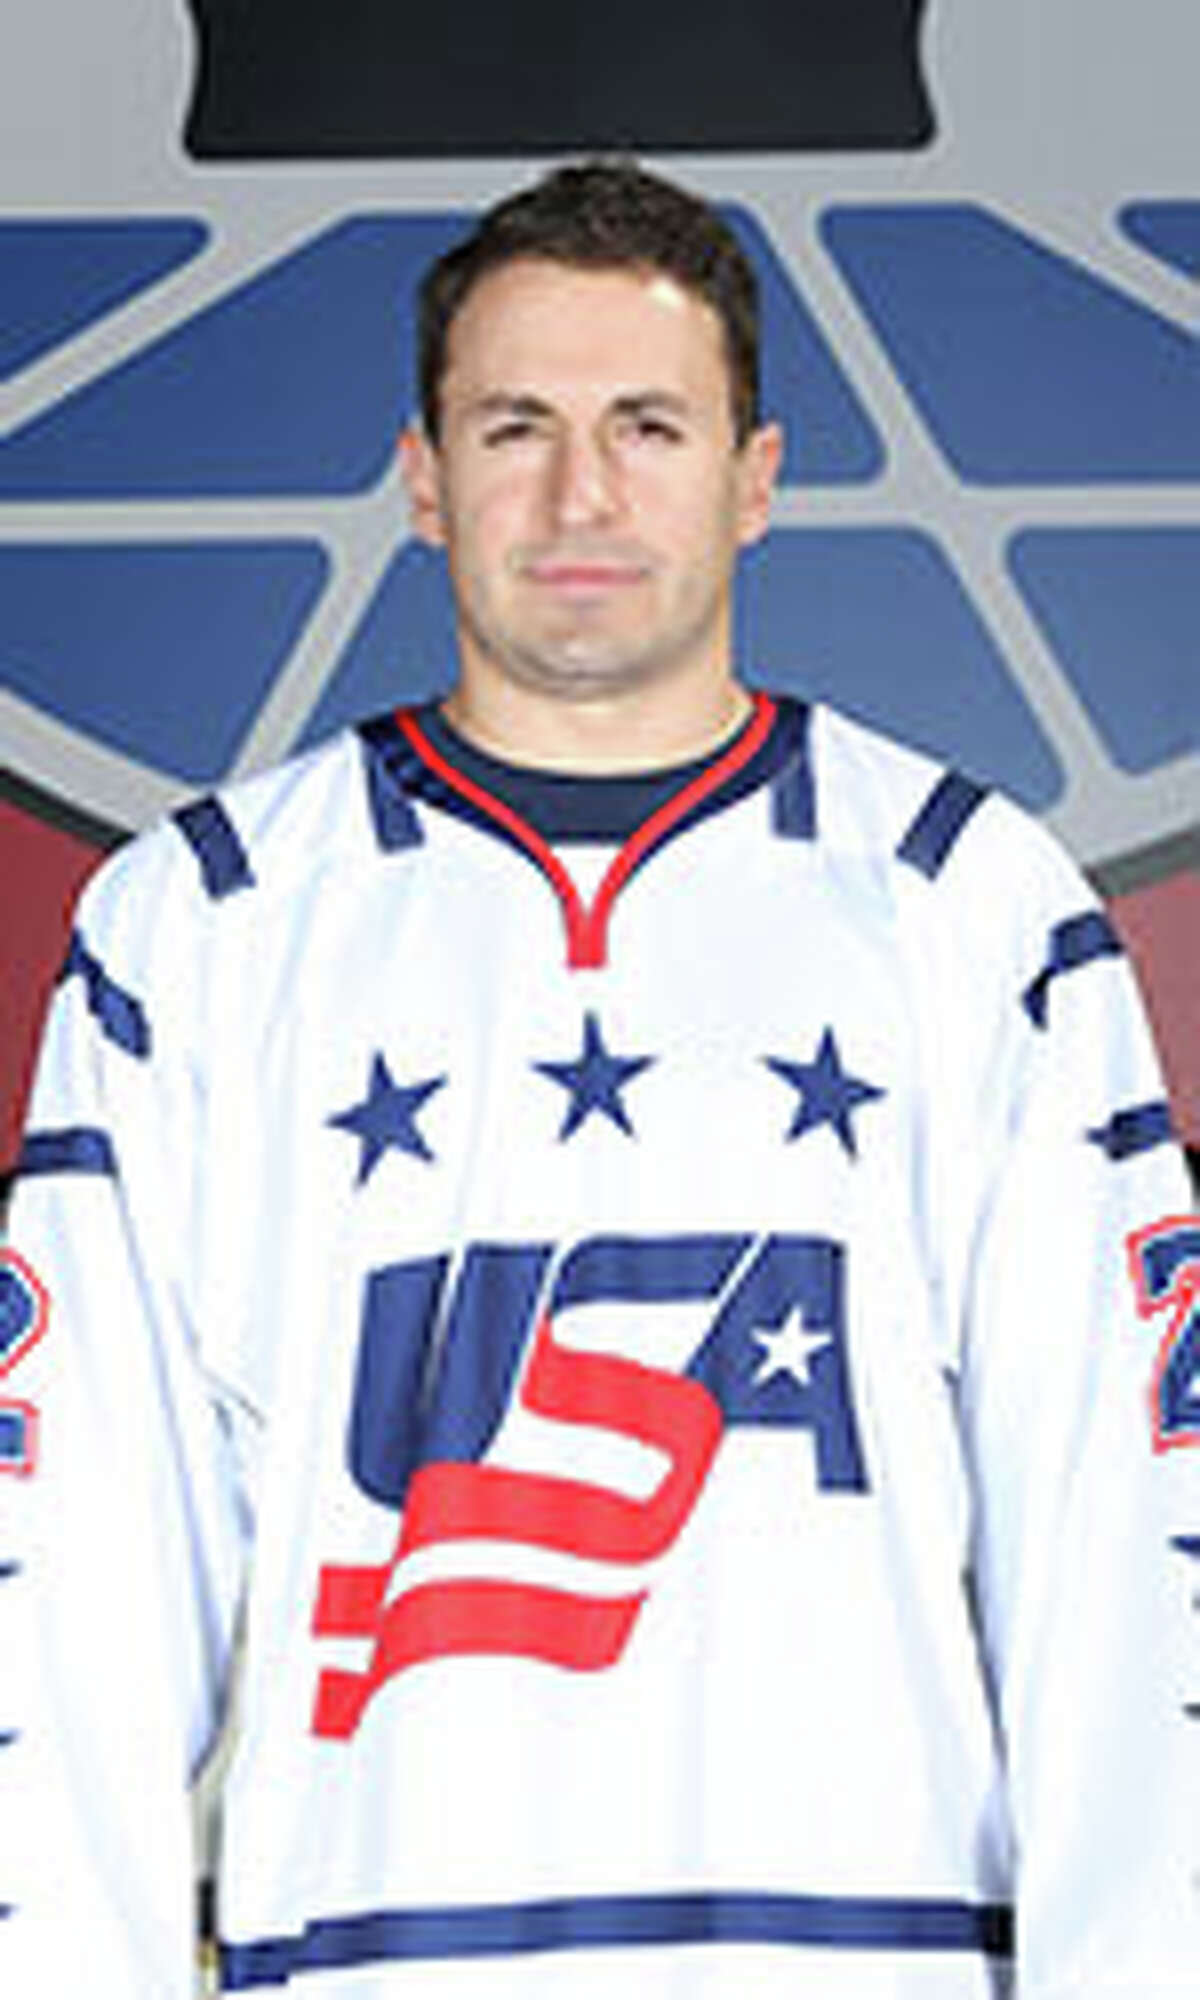 Name: Marine Corporal Luke McDermott First-time Paralympian Sport: Sled Hockey Position: Forward Height: 5-foot-7 Weight: 155 pounds Age: 30 Birthplace: Albany, N.Y. Hometown: Westerlo, N.Y. College: Texas Christian University, Political Science '14 Team: Buffalo Sabres